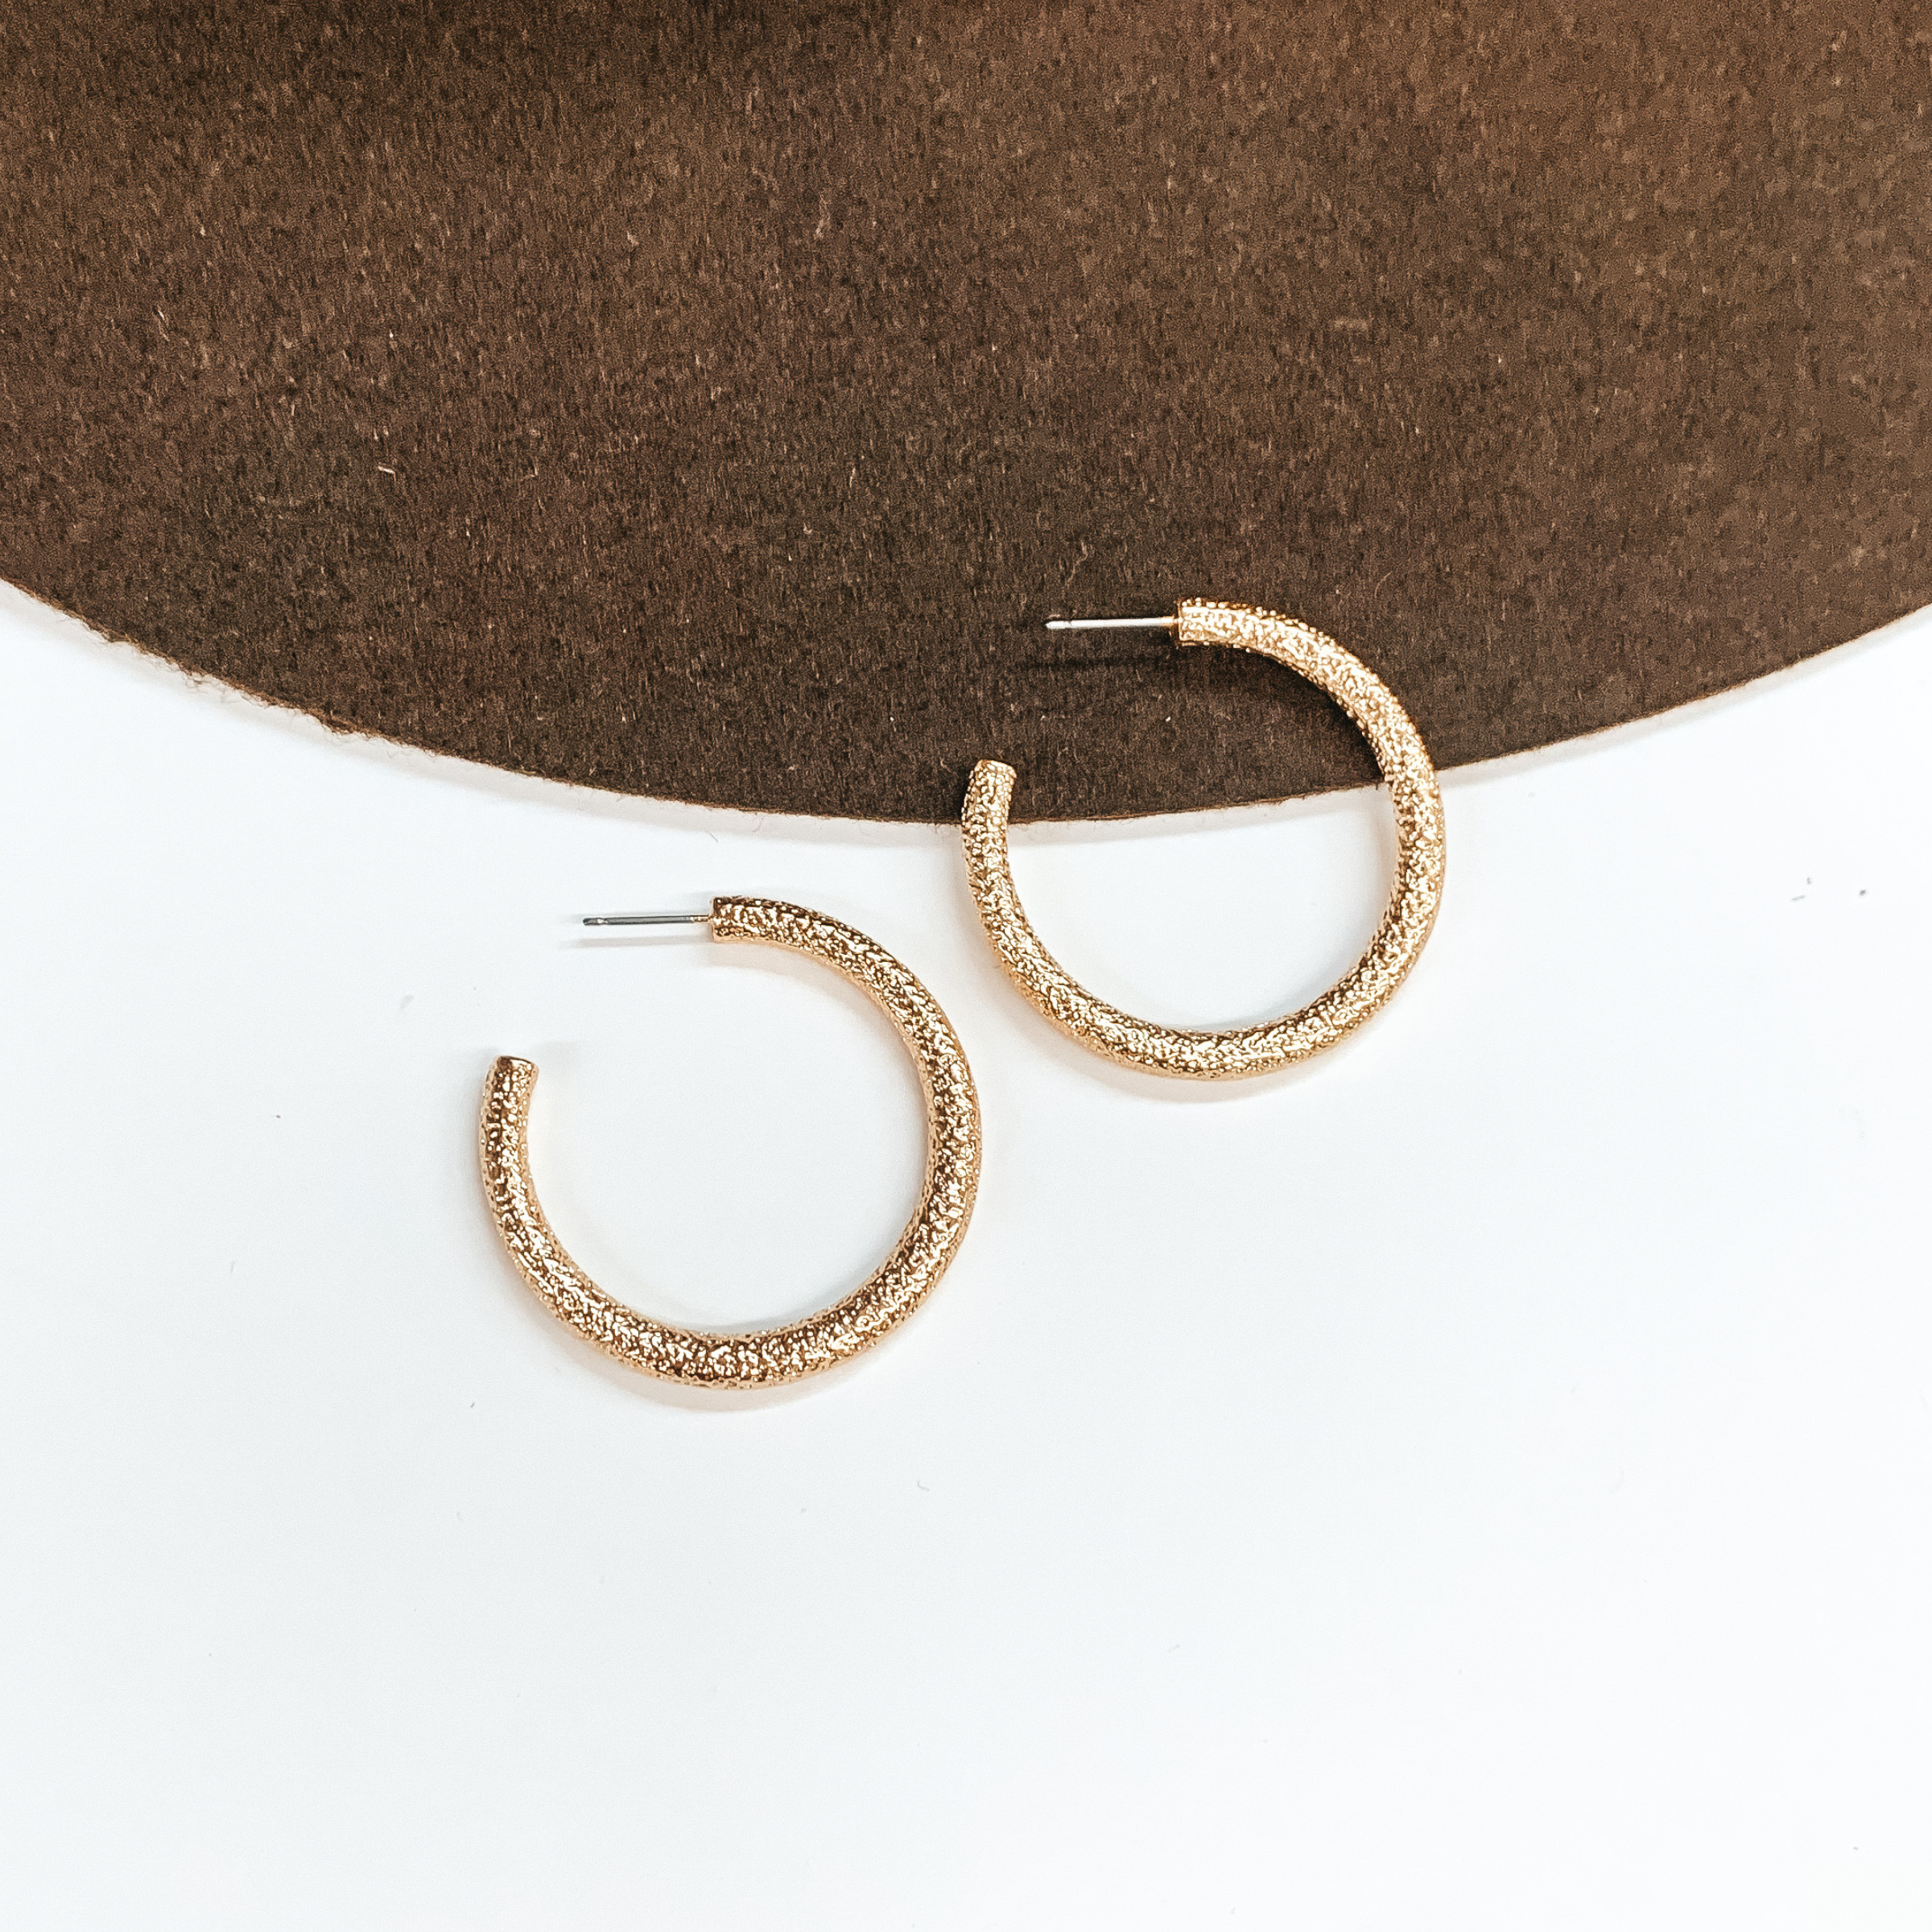 Textured Medium Sized Hoop Earrings in Gold - Giddy Up Glamour Boutique